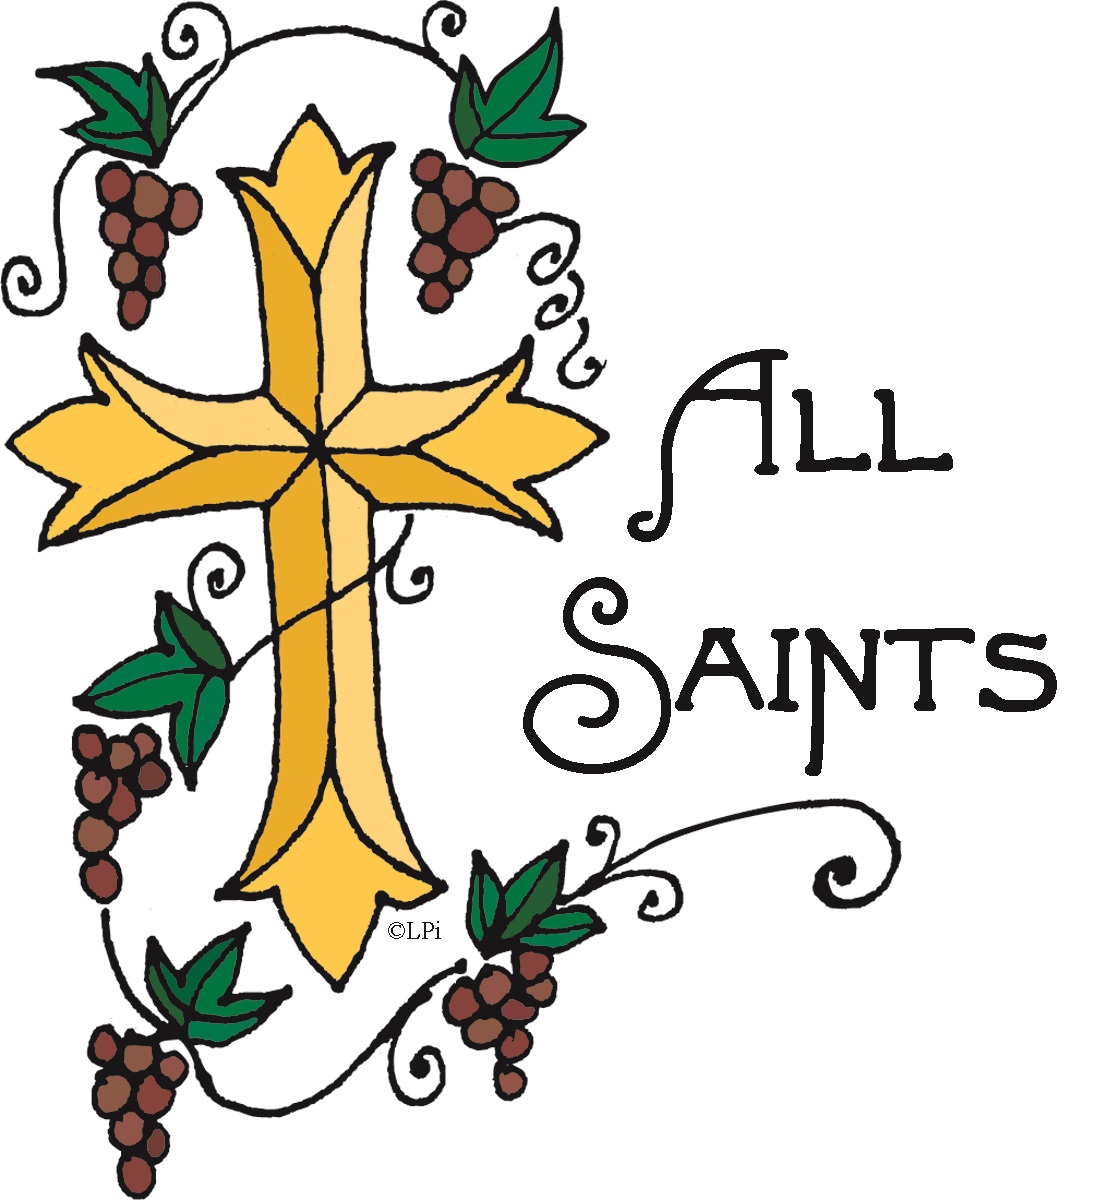 All saints day.